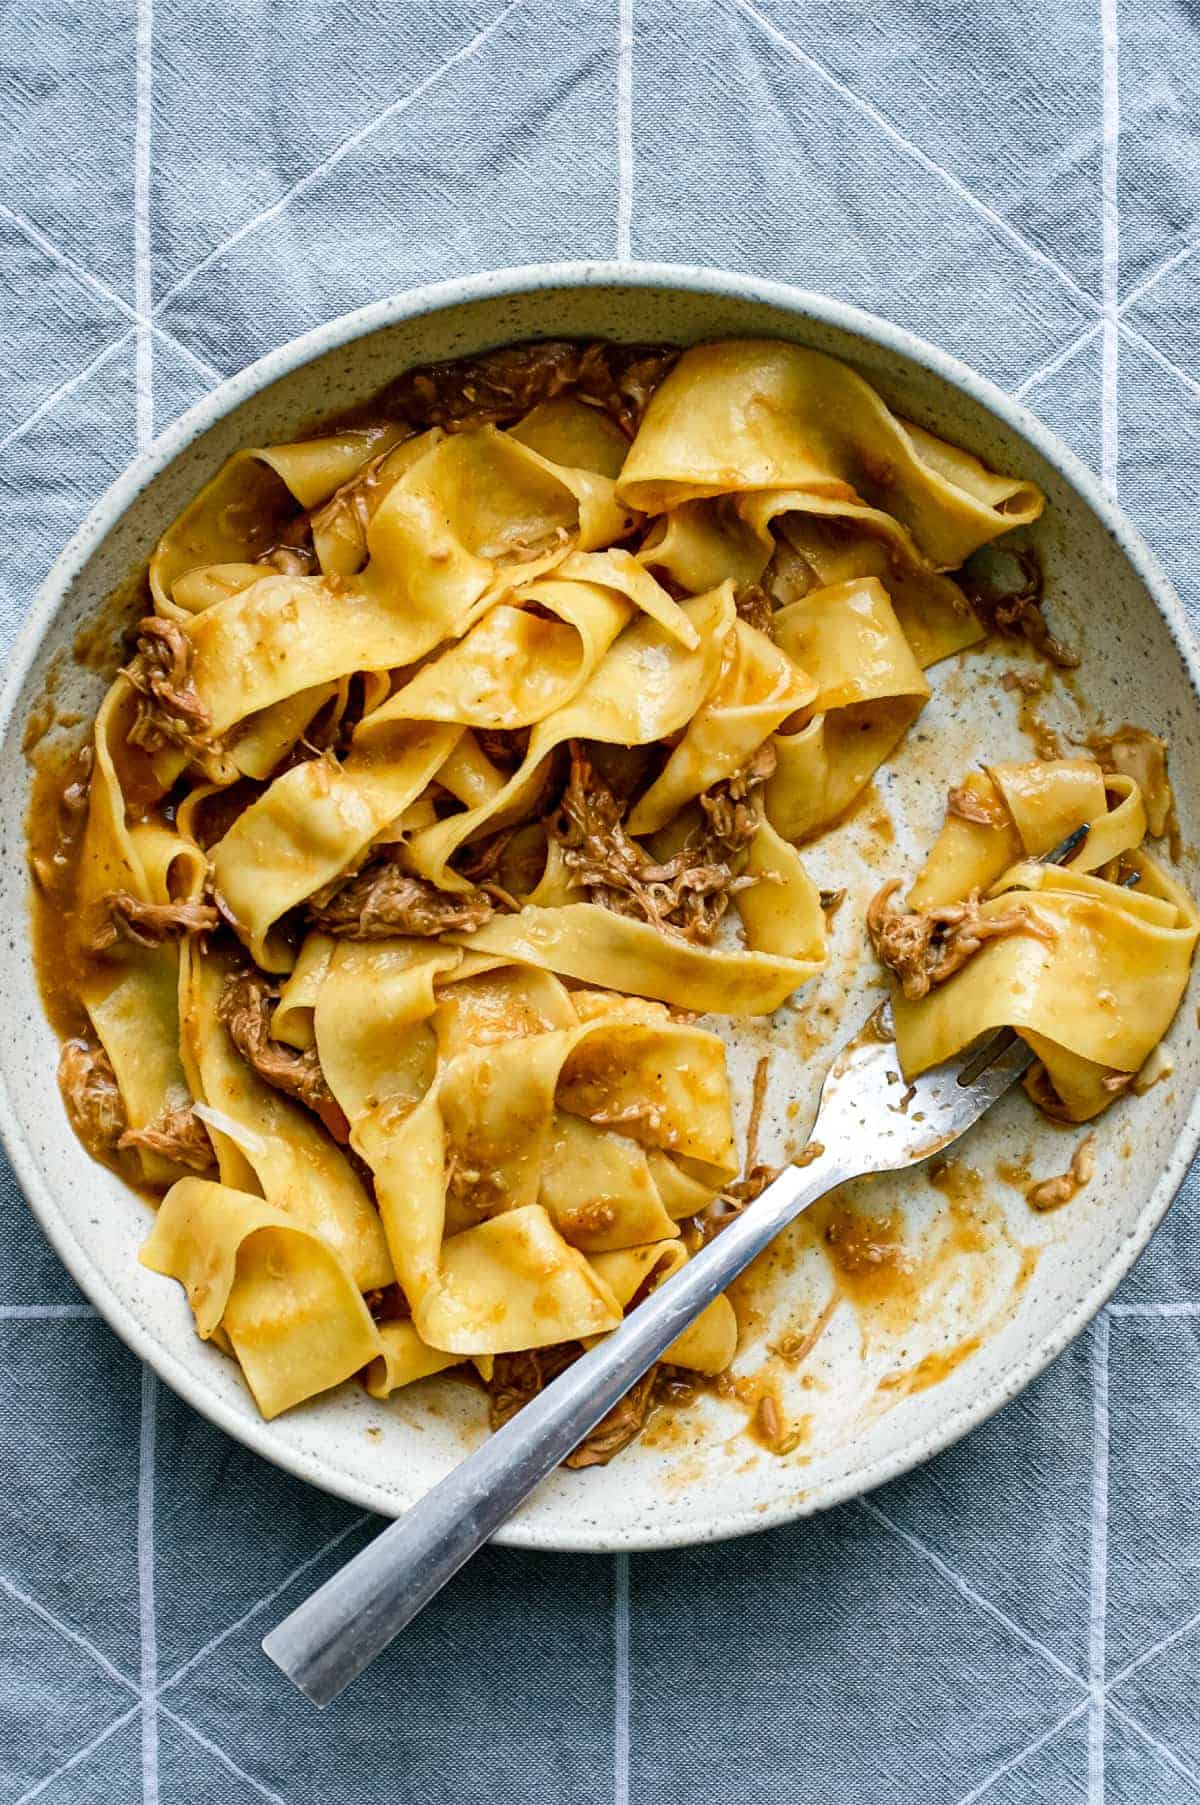 A bowl of pappardelle pasta with a lamb ragu sauce with a fork